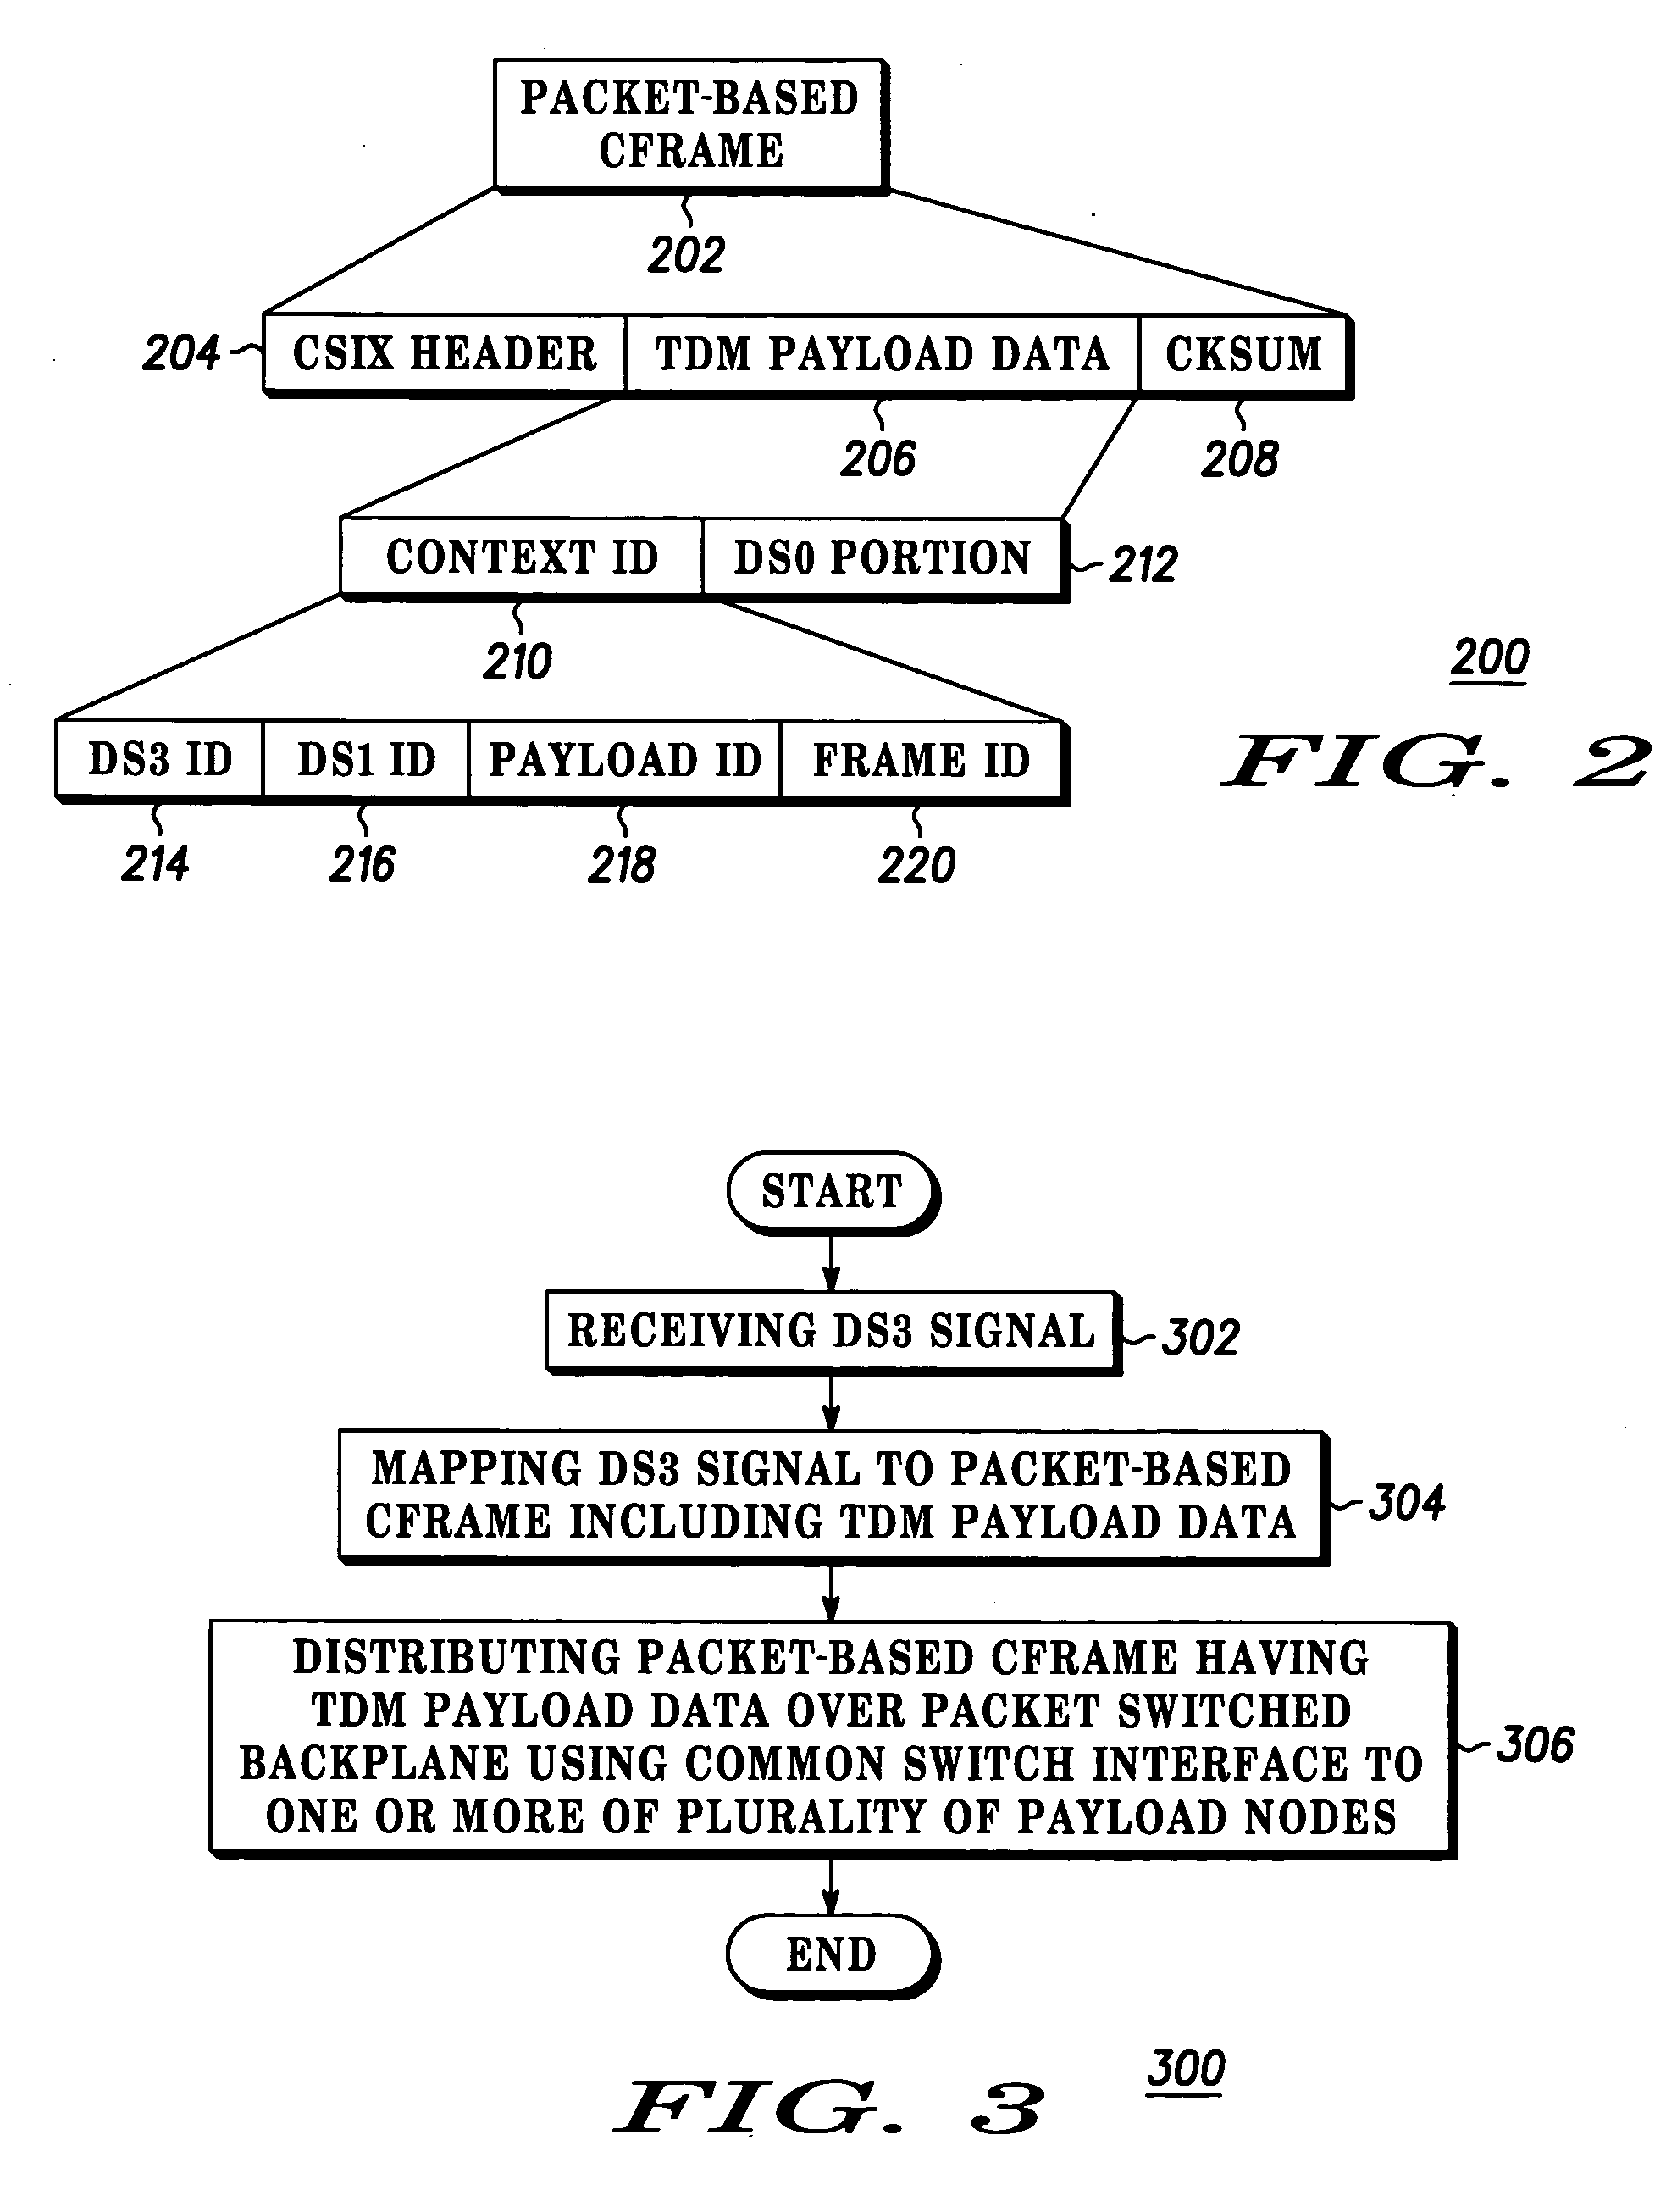 Method and apparatus for mapping TDM payload data